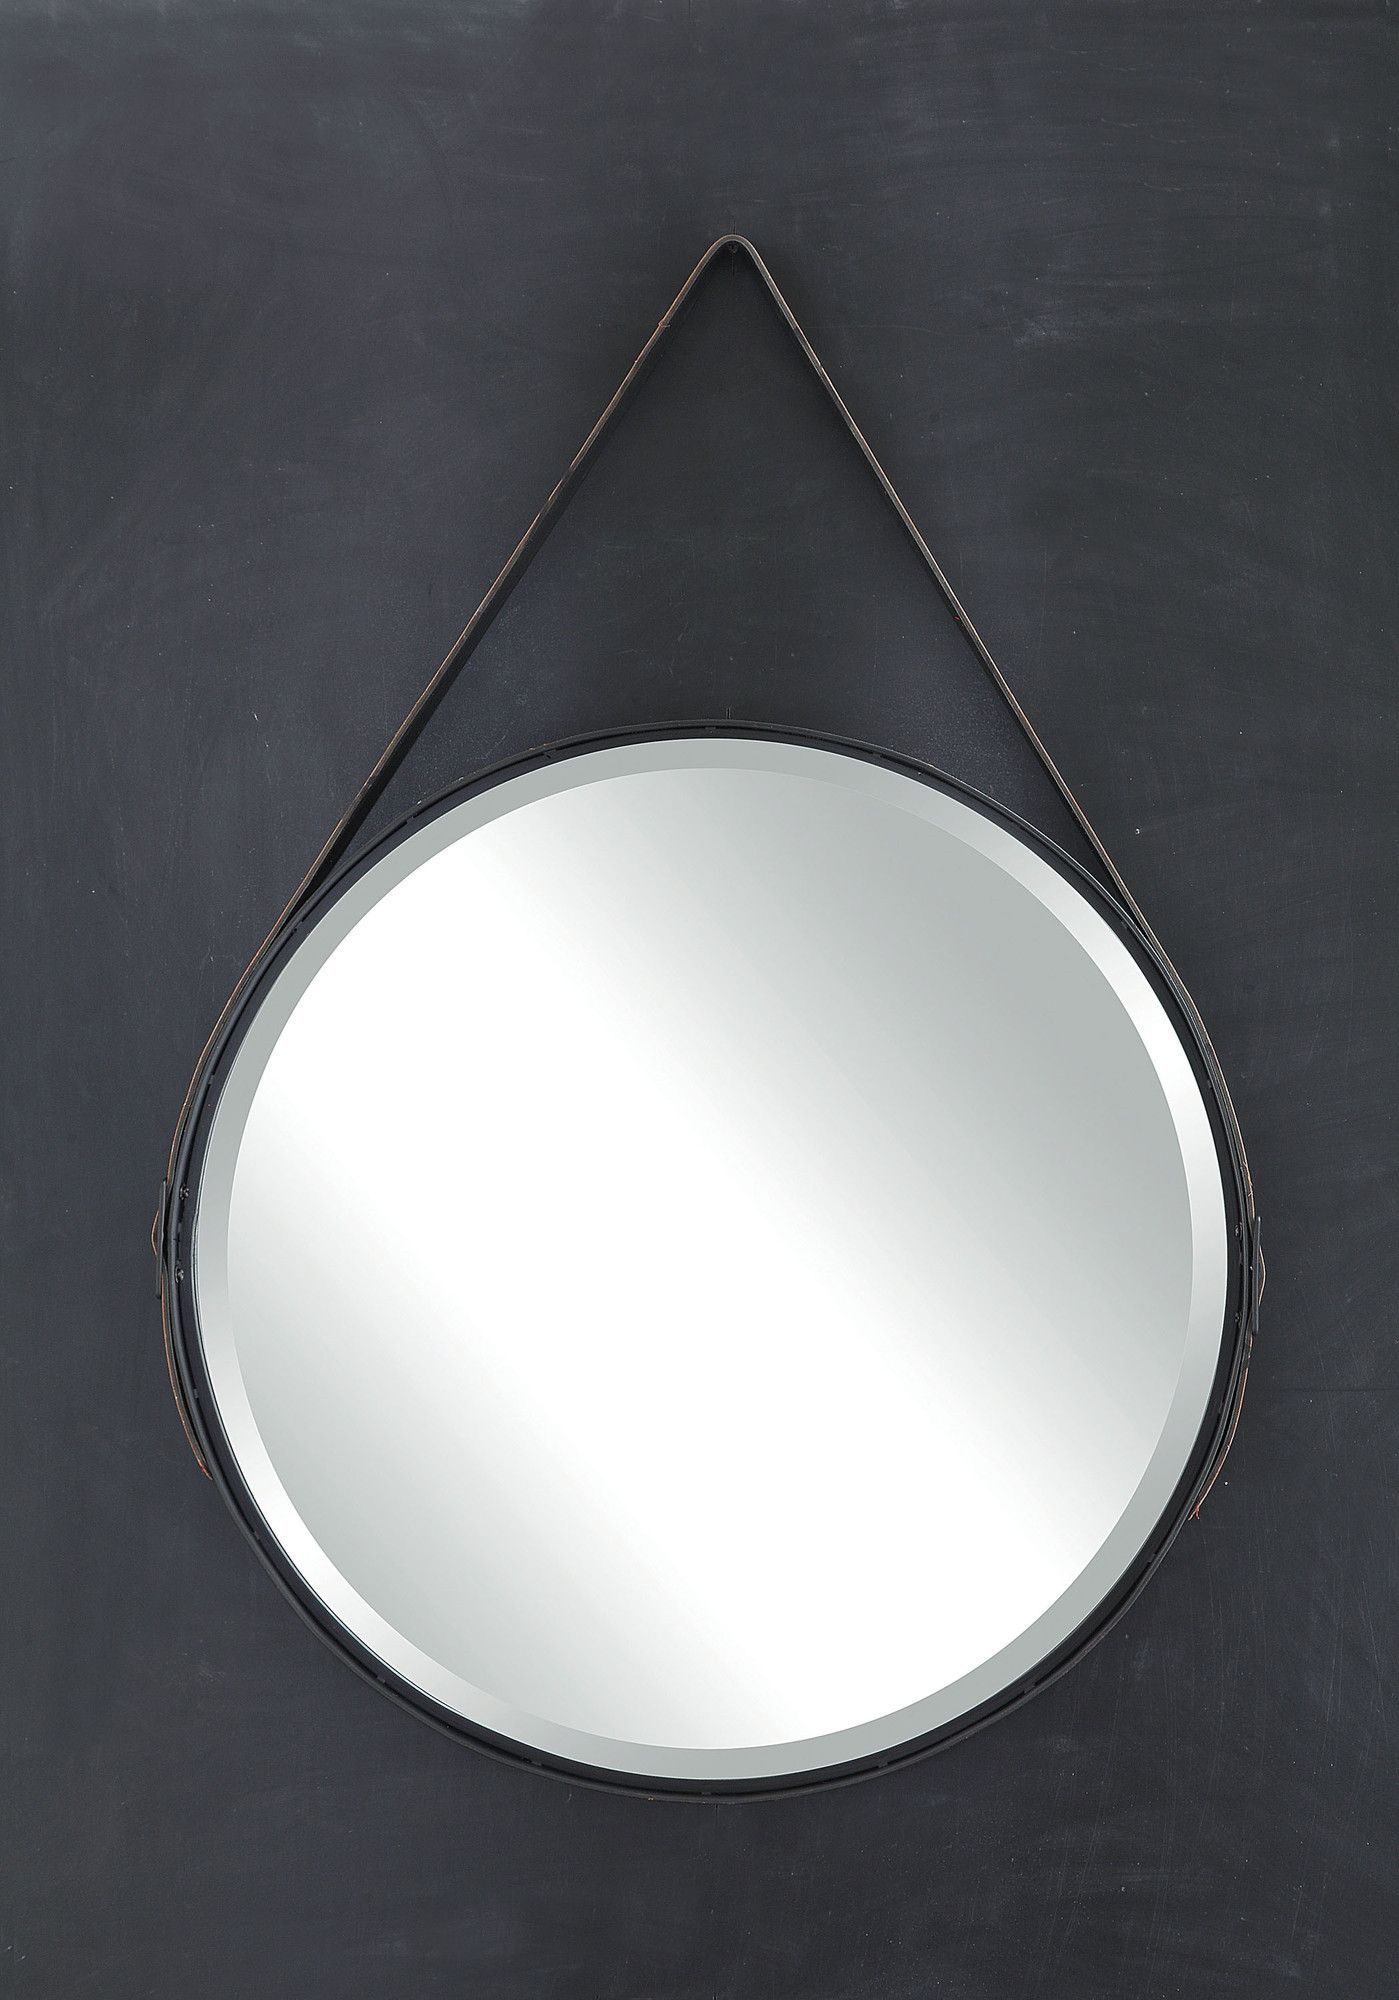 Round Mirror With Leather Strap | Mirrors With Leather Straps, Metal In Black Leather Strap Wall Mirrors (Photo 14 of 15)